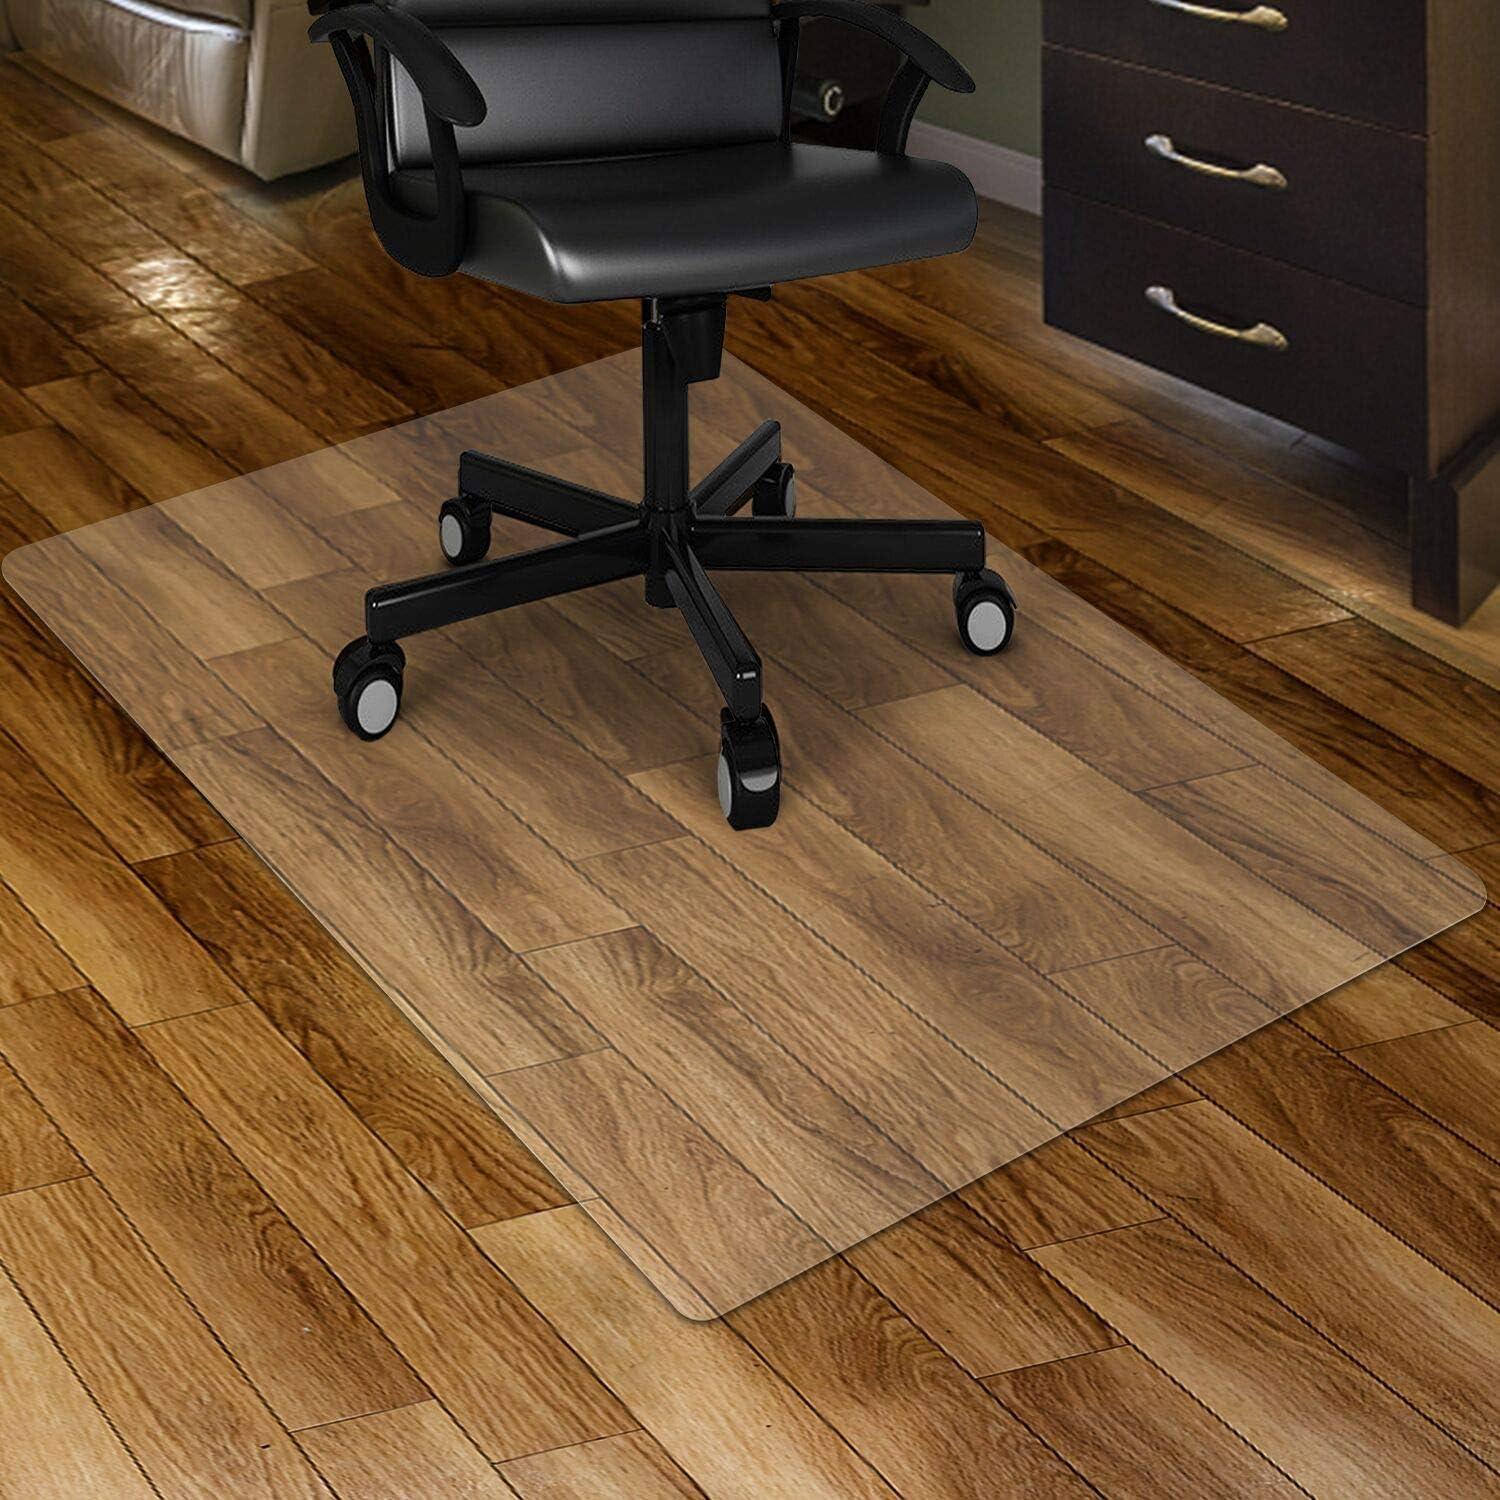 Kuyal Clear Chair mat for Hard Floors 90x120cm (3'x4') Wood/Tile Protection - Massive Discounts